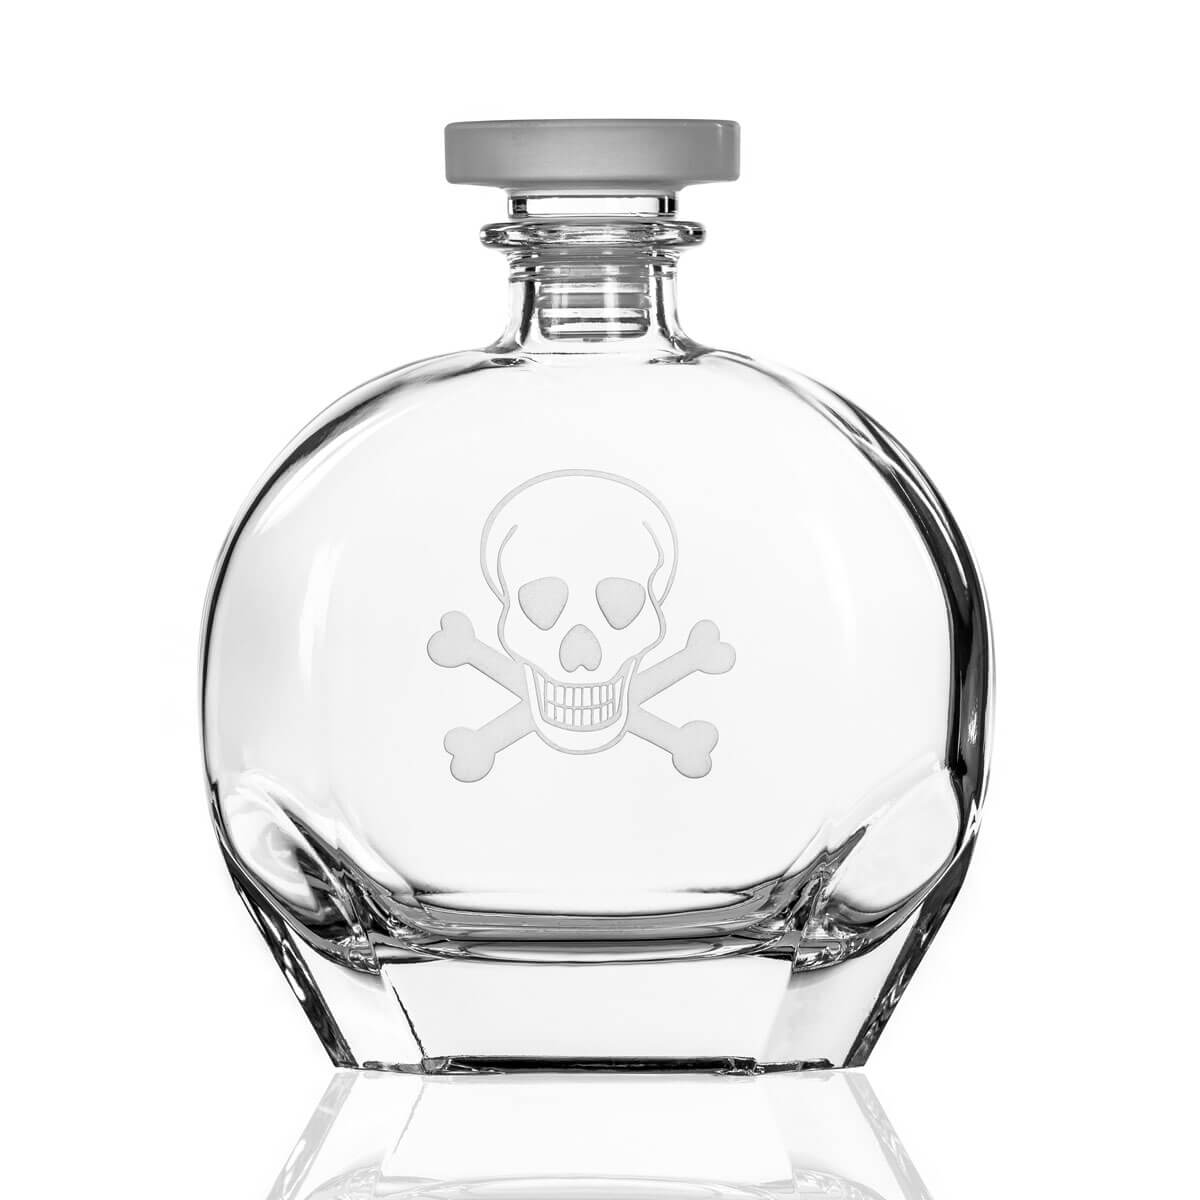 Skull and Crossbones Decanter 3 Piece Set-Nautical Decor and Gifts